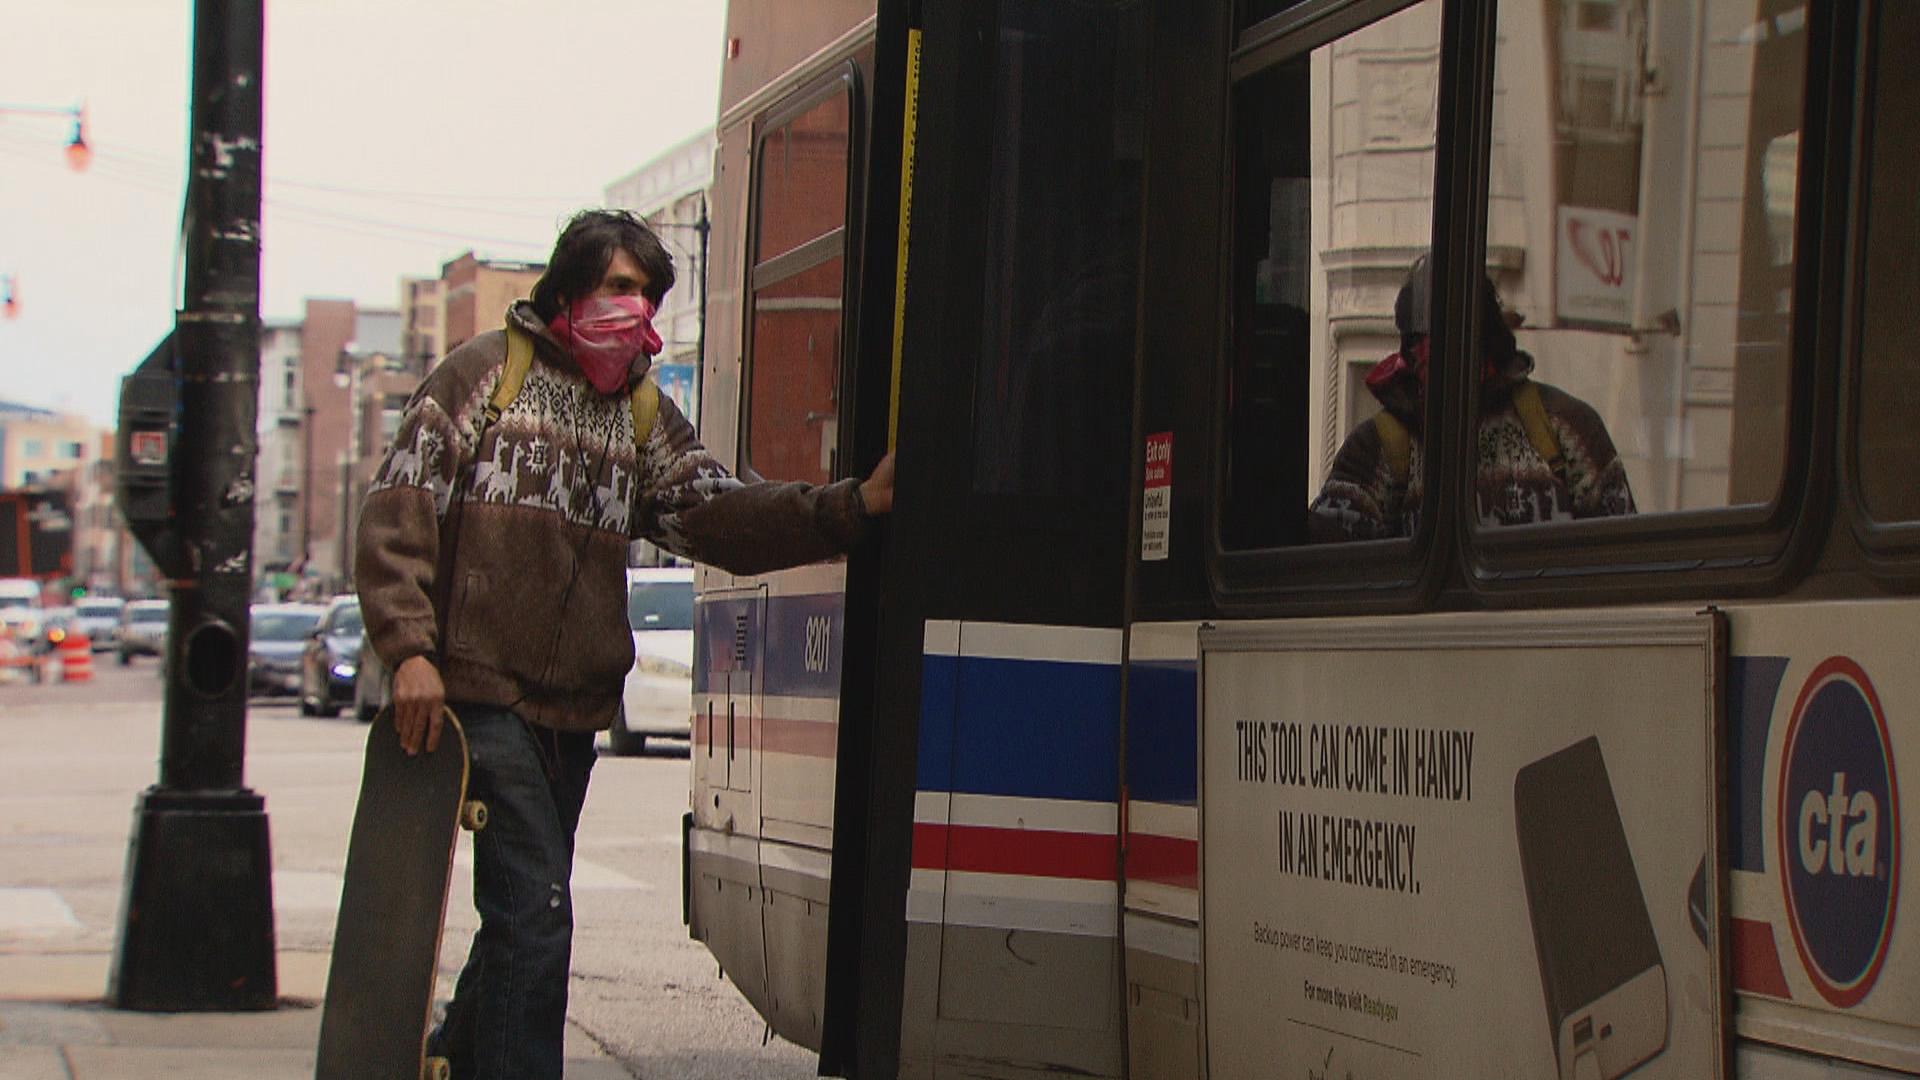 A passenger boards a CTA bus from the rear doors on Thursday, April 9, 2020. (WTTW News)